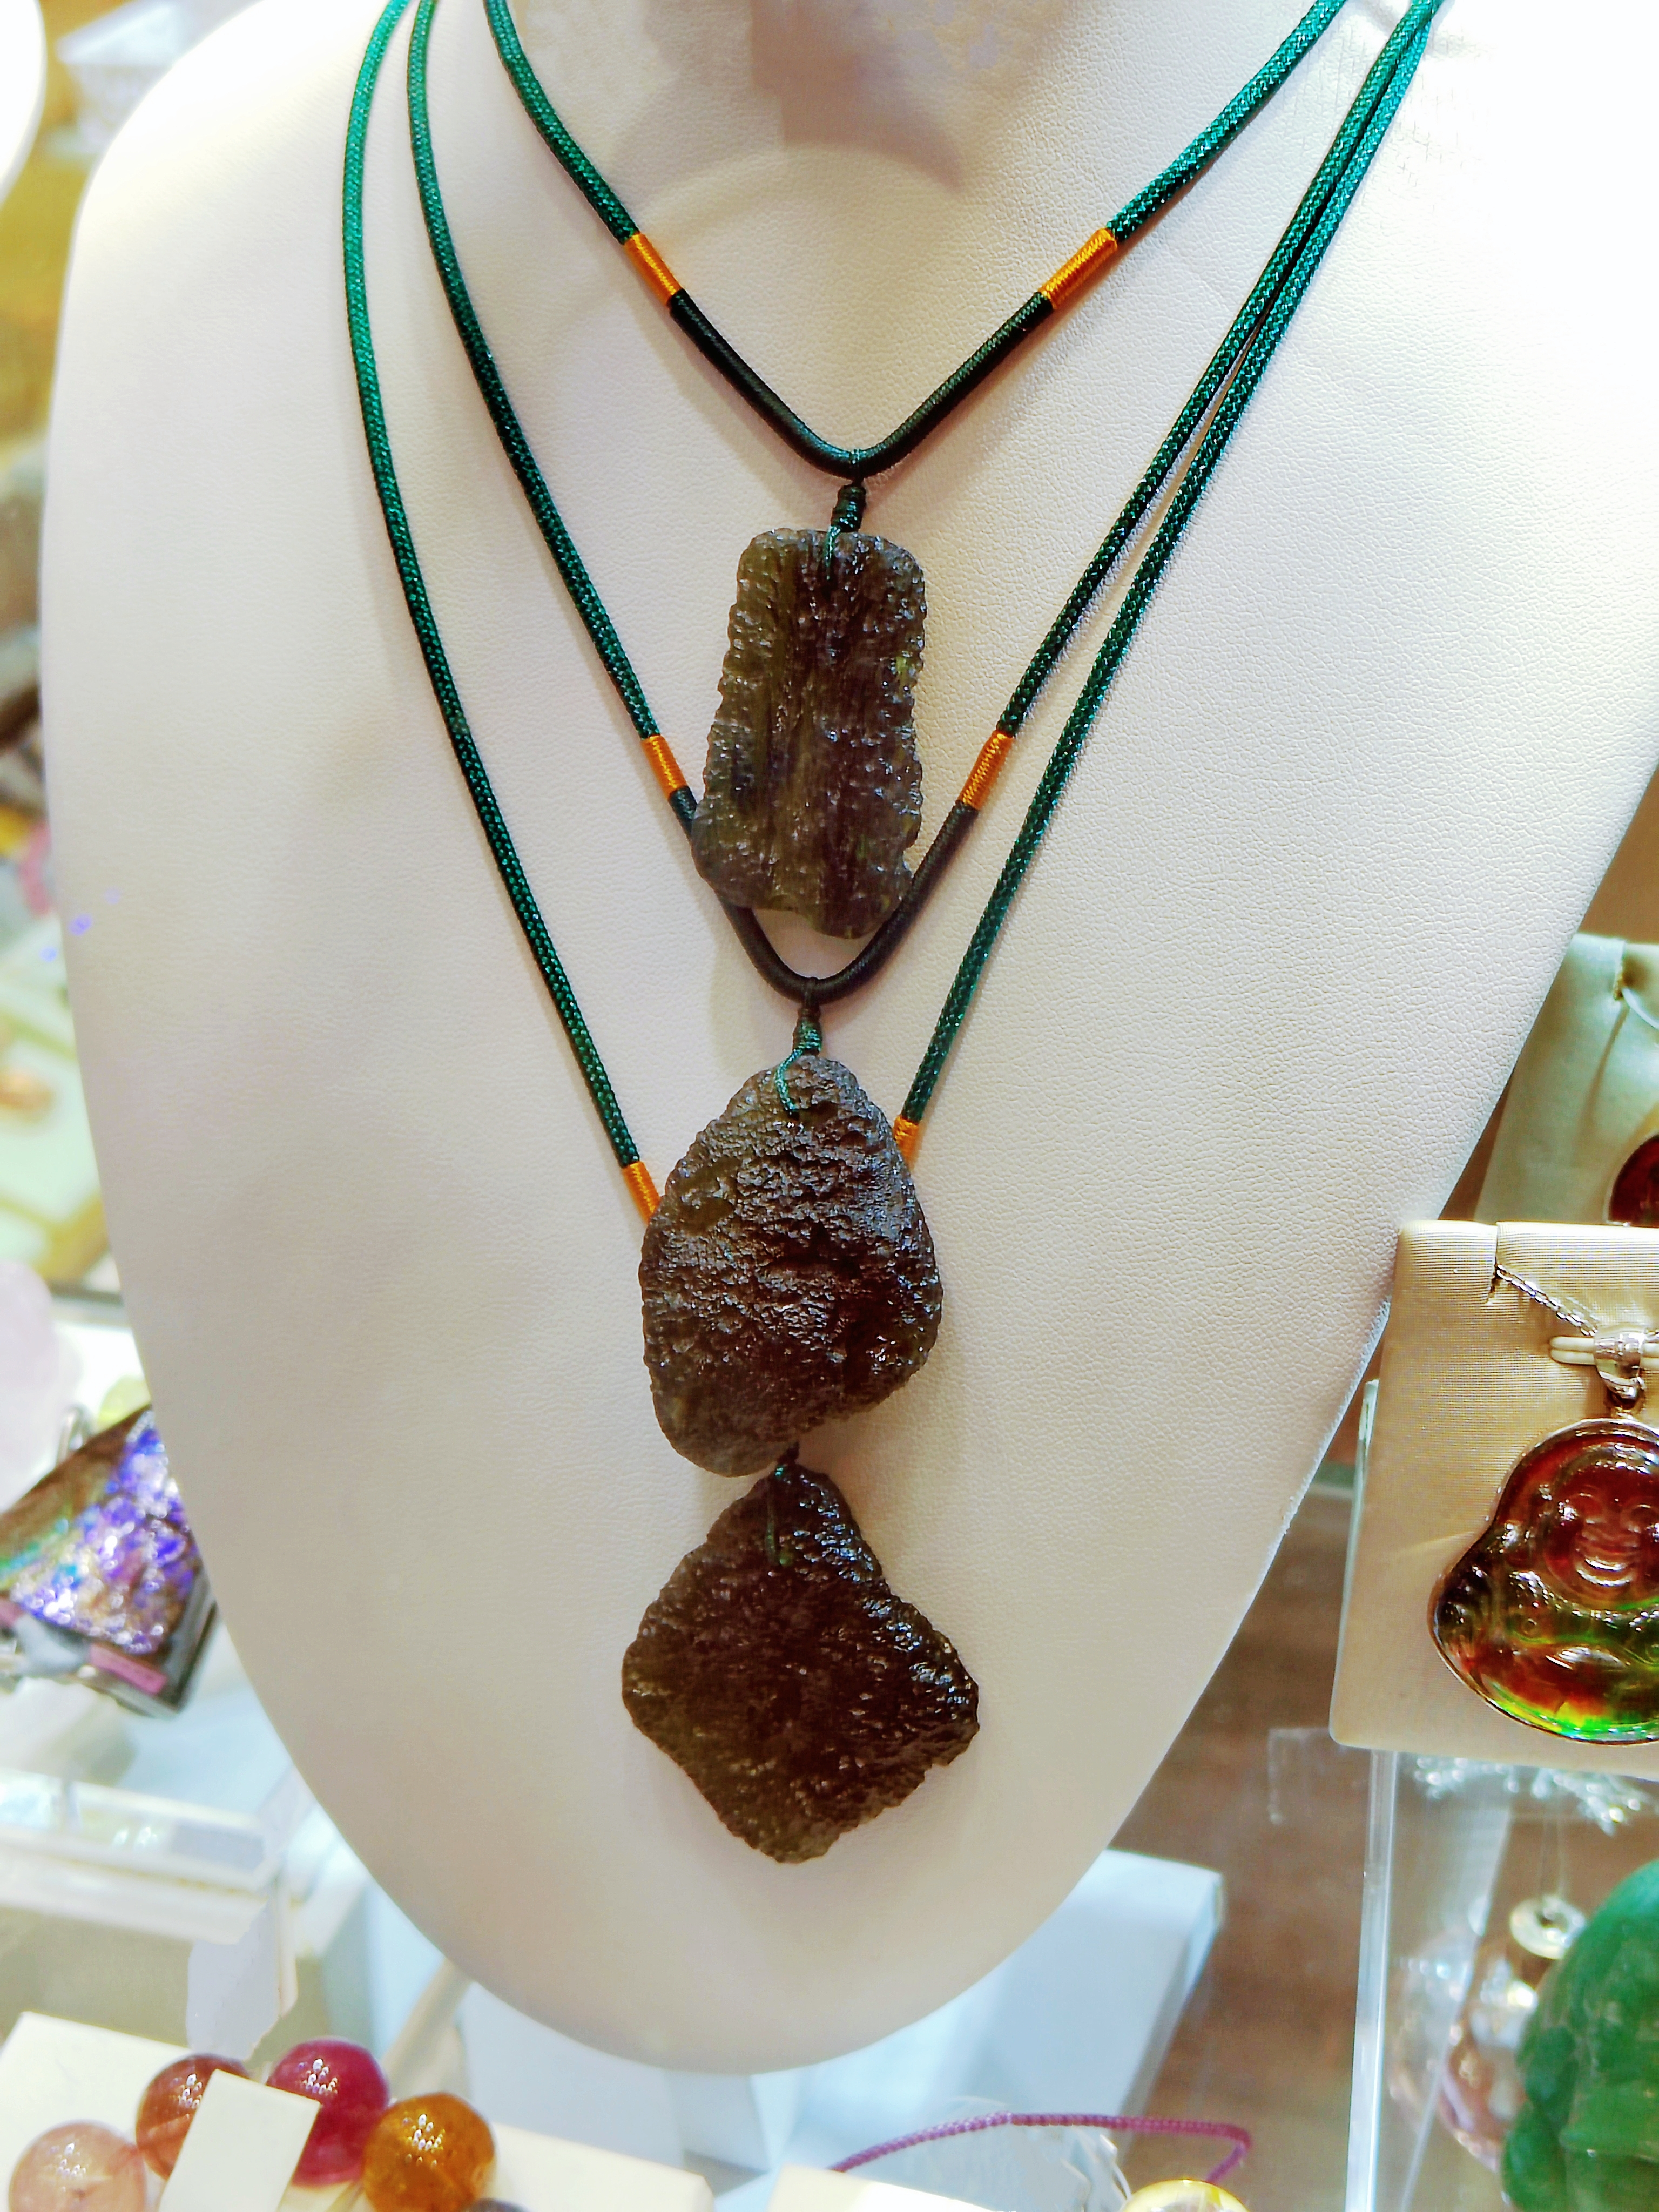 Photo of moldavite used in a three-tiered necklace | Source: Getty Images